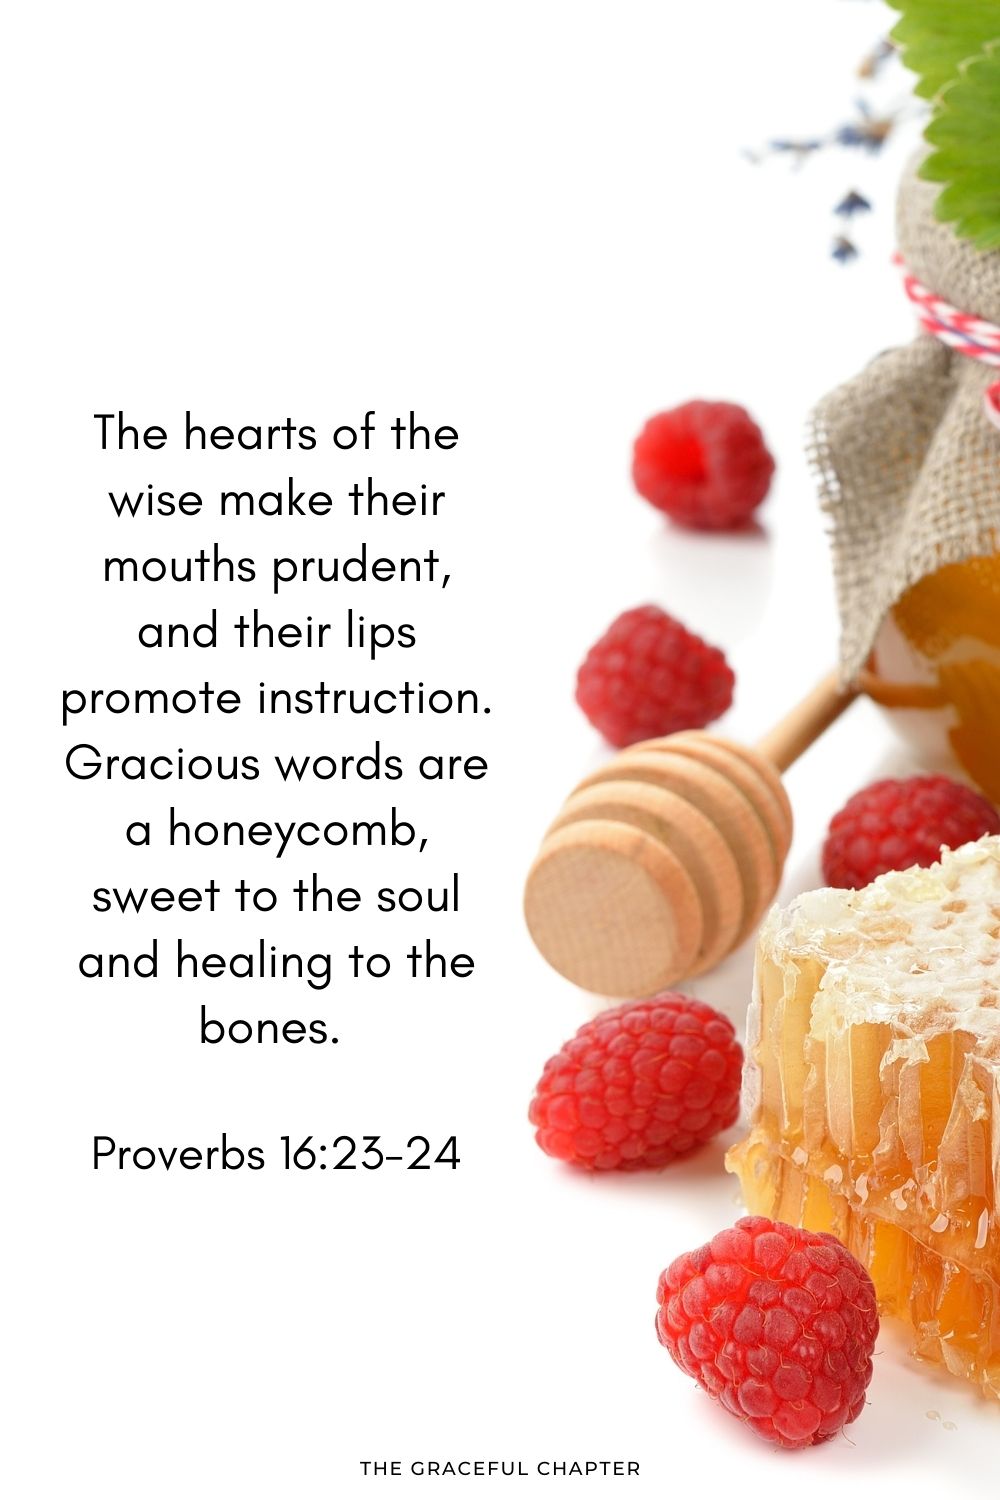 The hearts of the wise make their mouths prudent, and their lips promote instruction. Gracious words are a honeycomb, sweet to the soul and healing to the bones. Proverbs 16:23-24